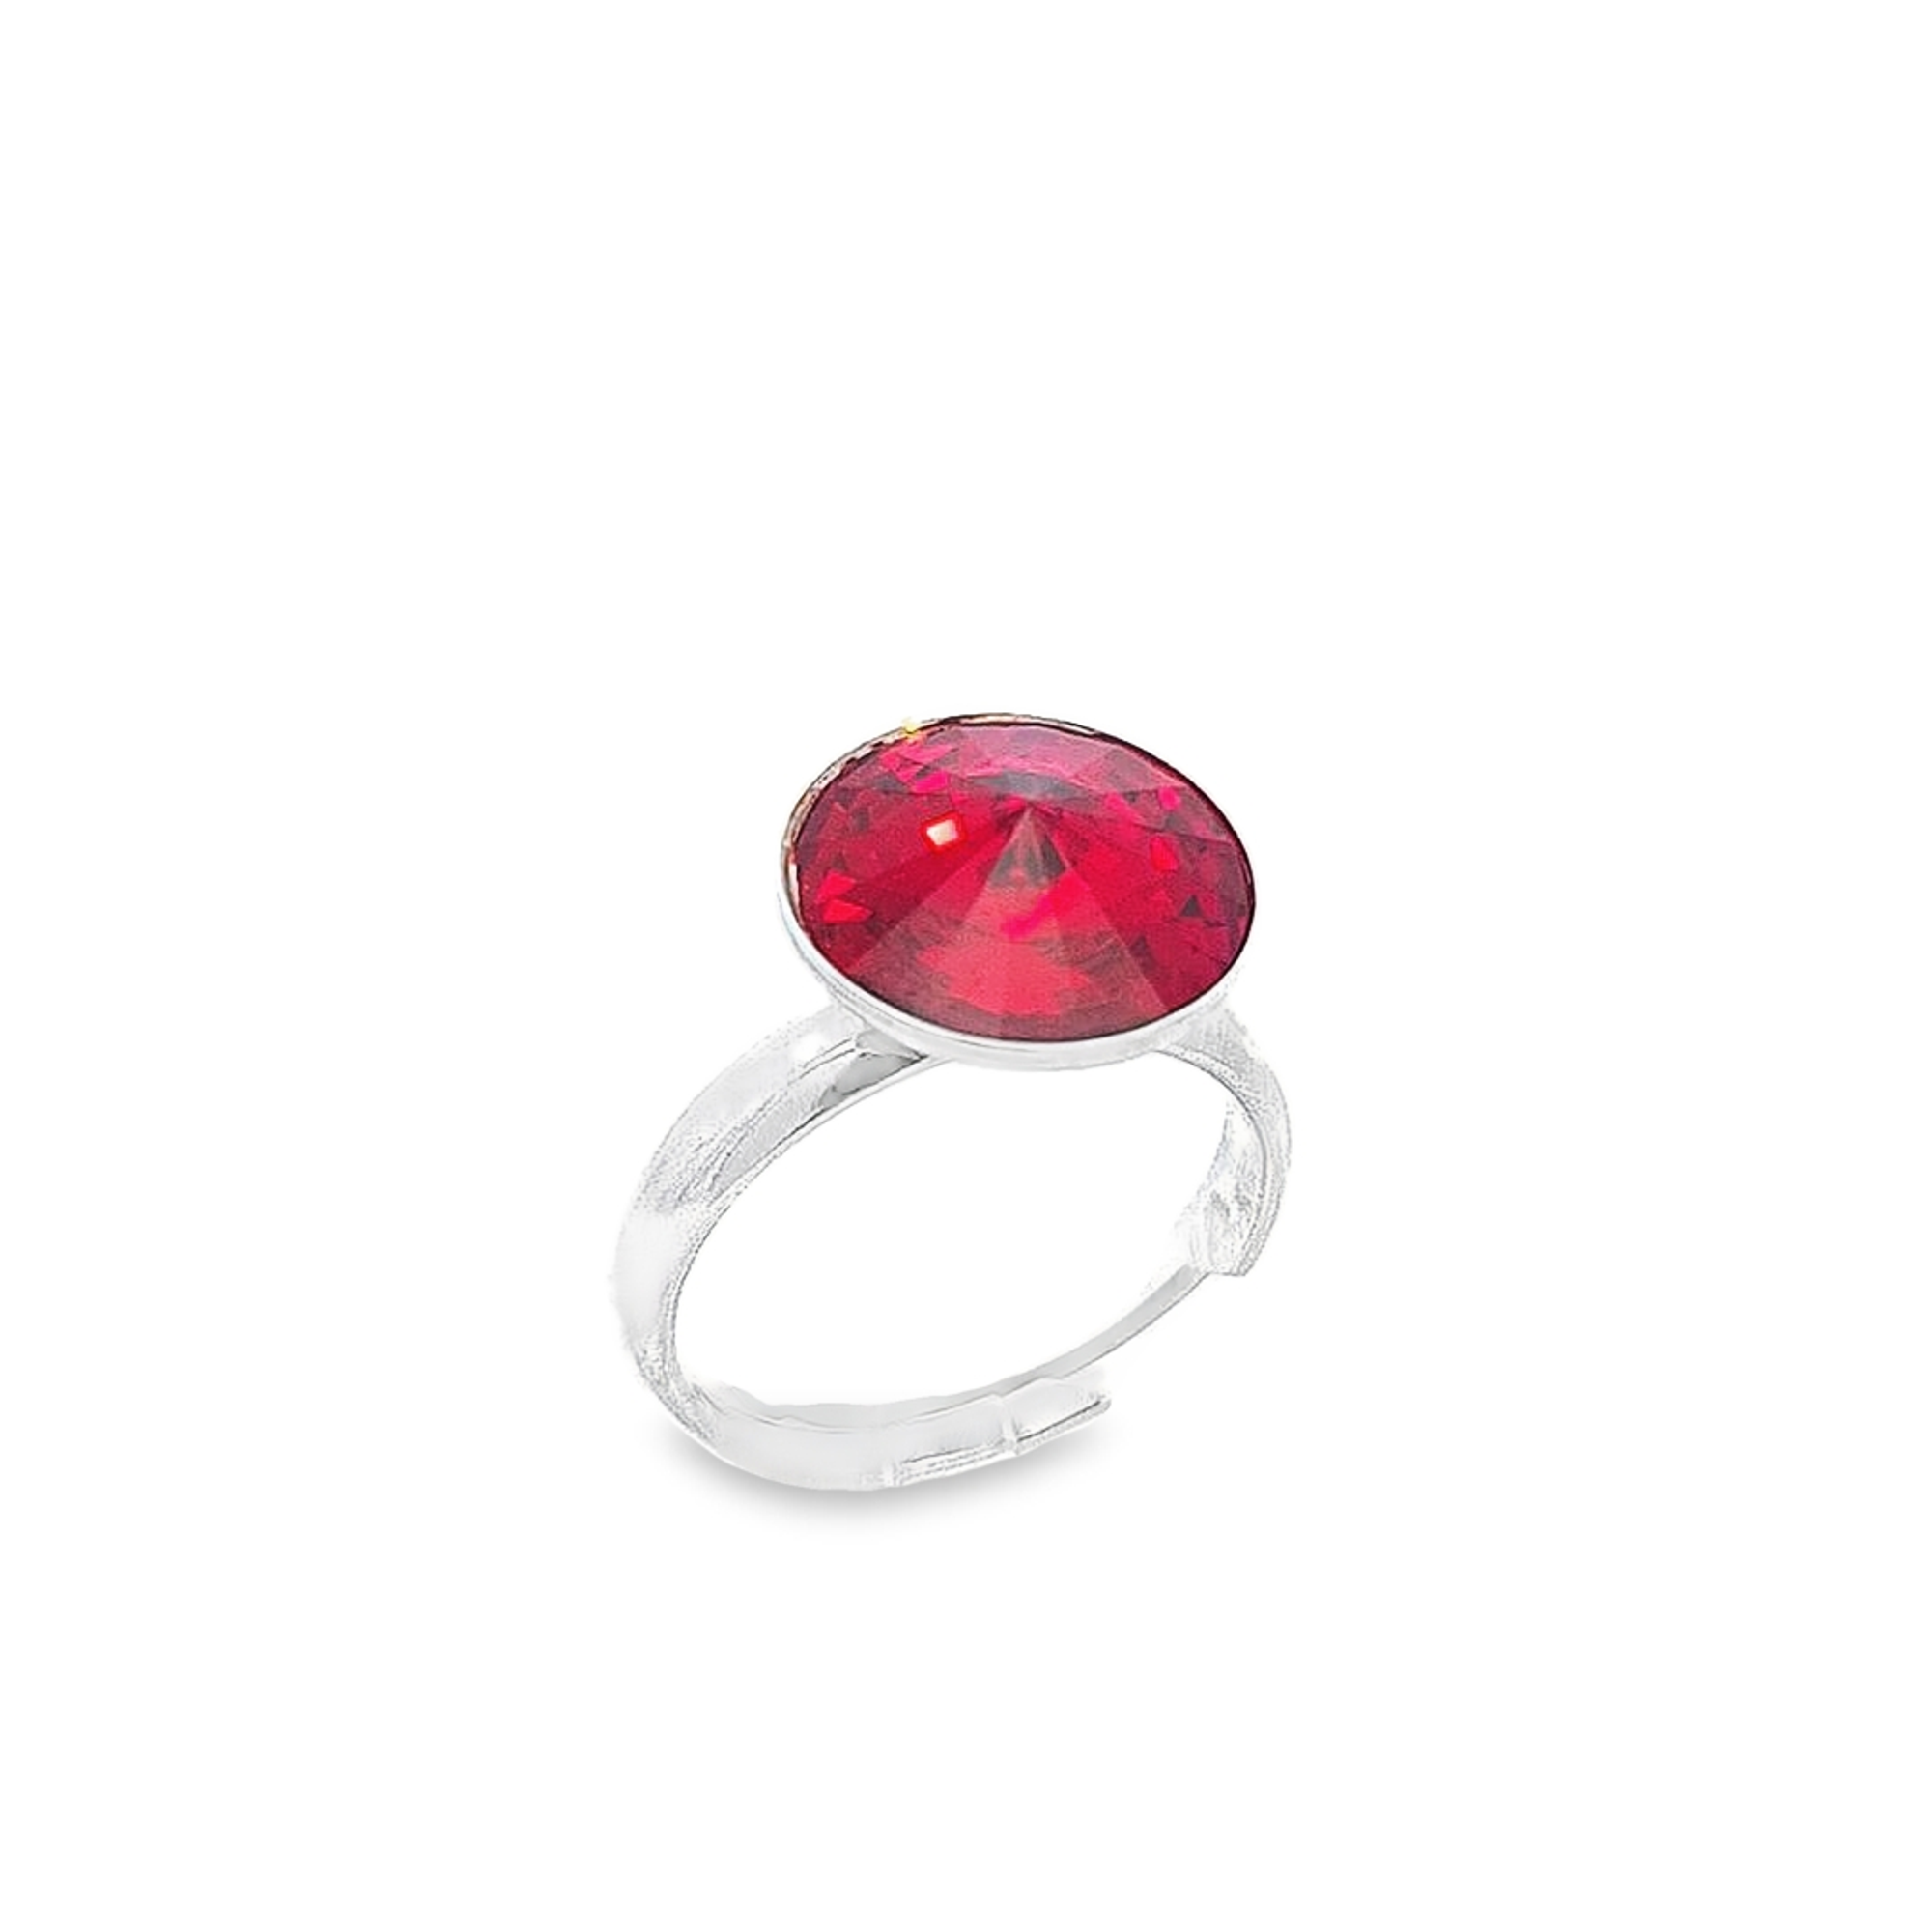 12mm Round Rivoli Solitaire Ring in Sterling Silver - Available in Silver Night, Tanzanite Purple, or Light Siam Red